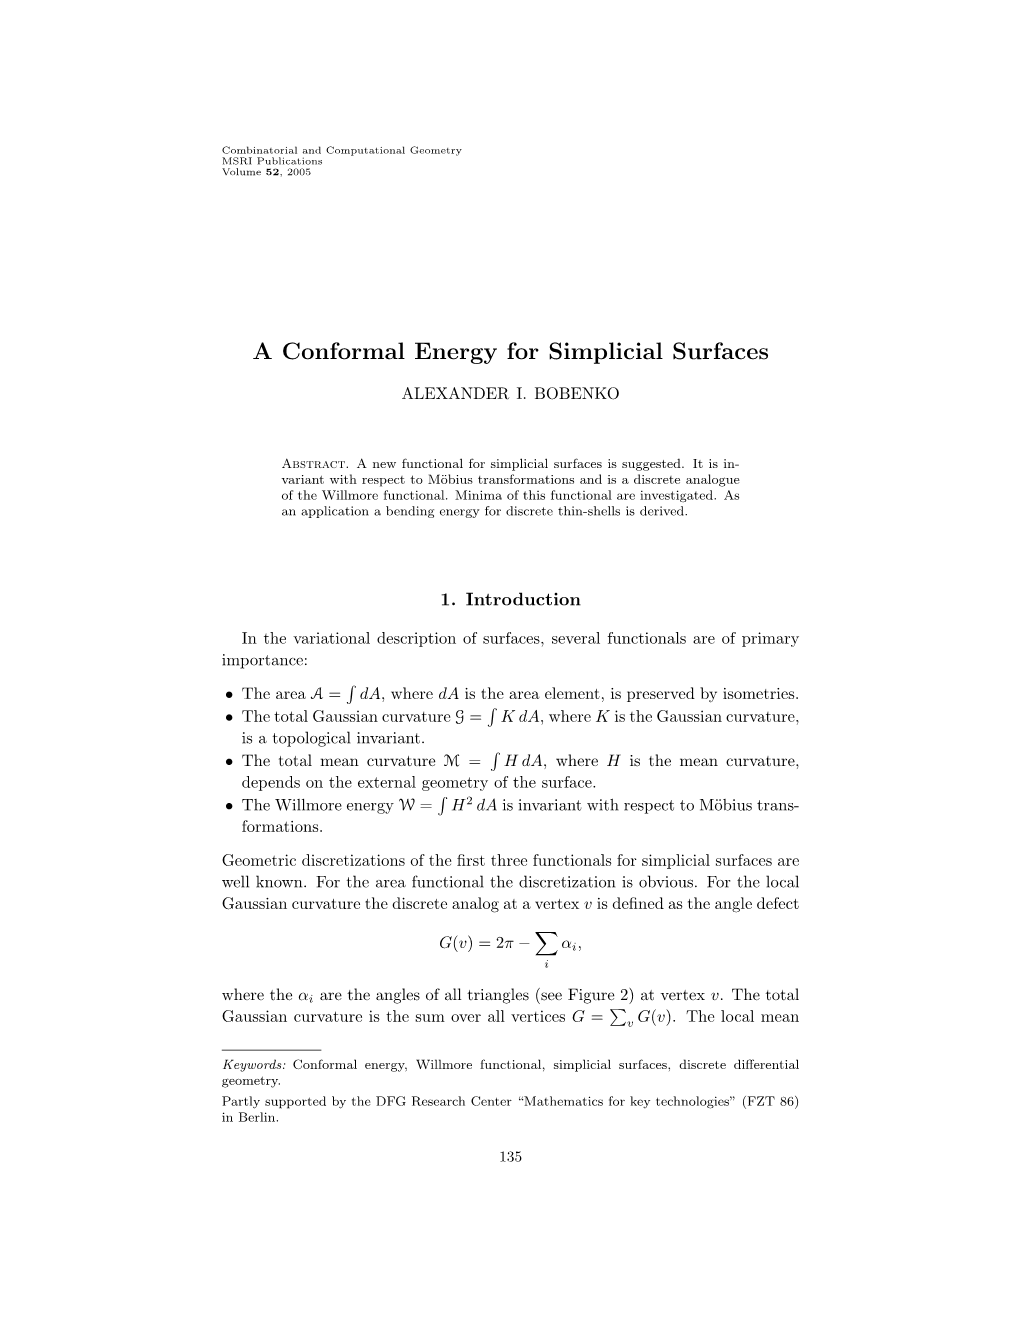 A Conformal Energy for Simplicial Surfaces